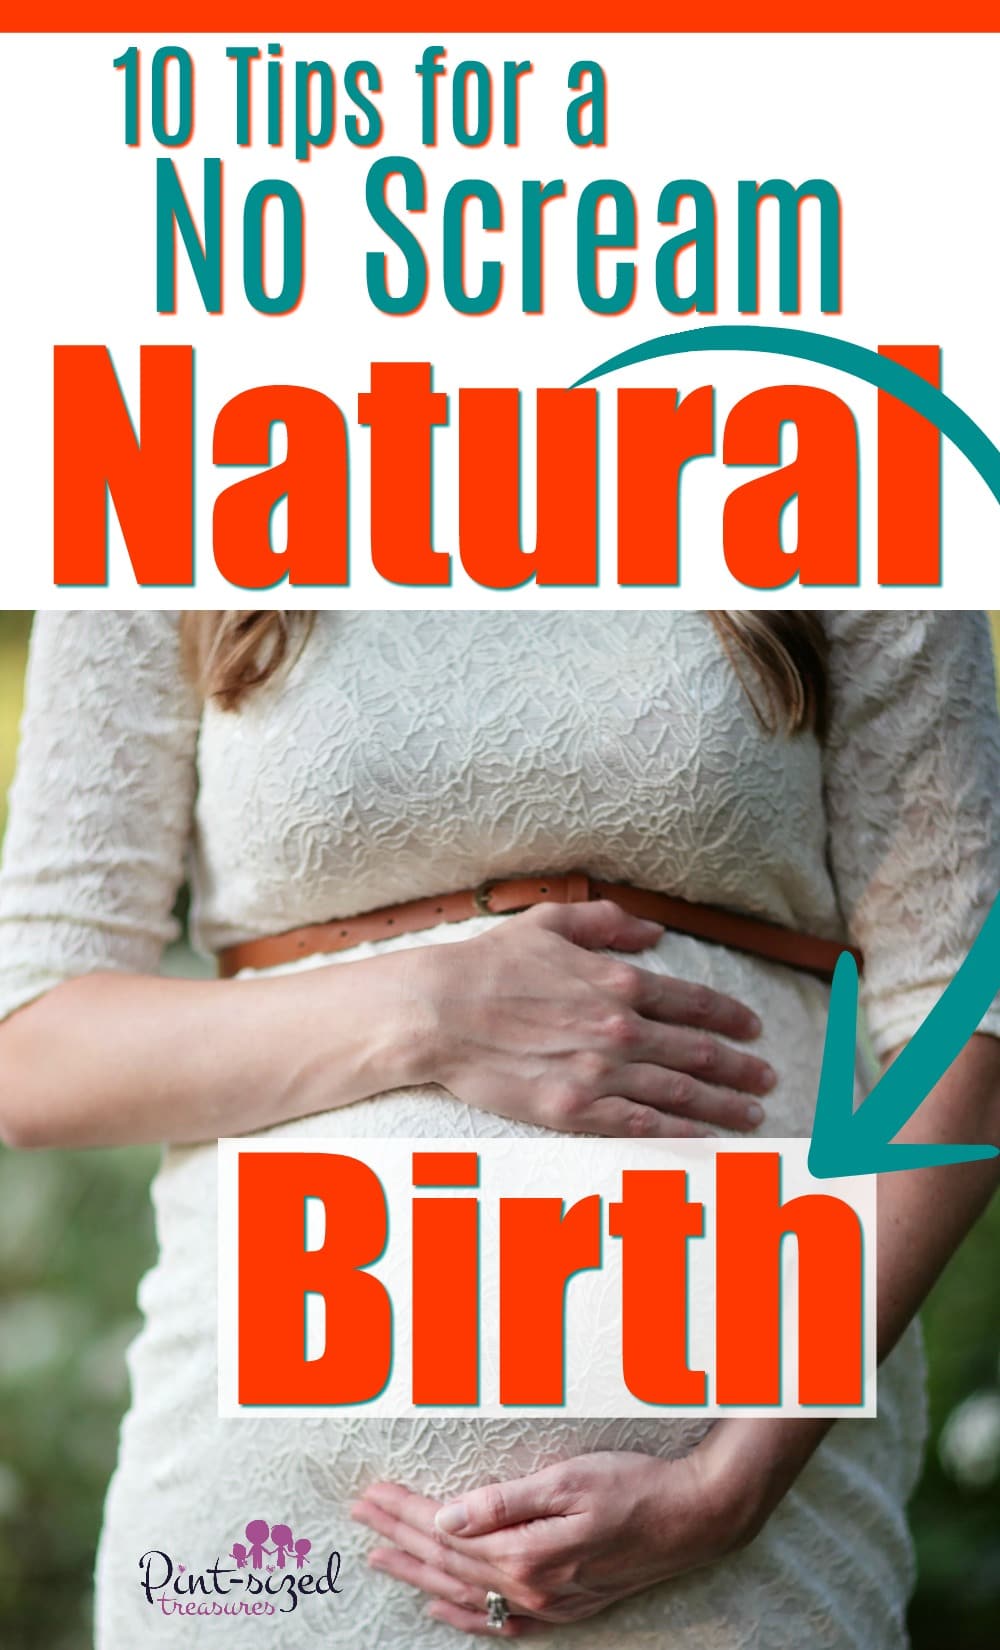 How to Have a No Scream Natural Birth